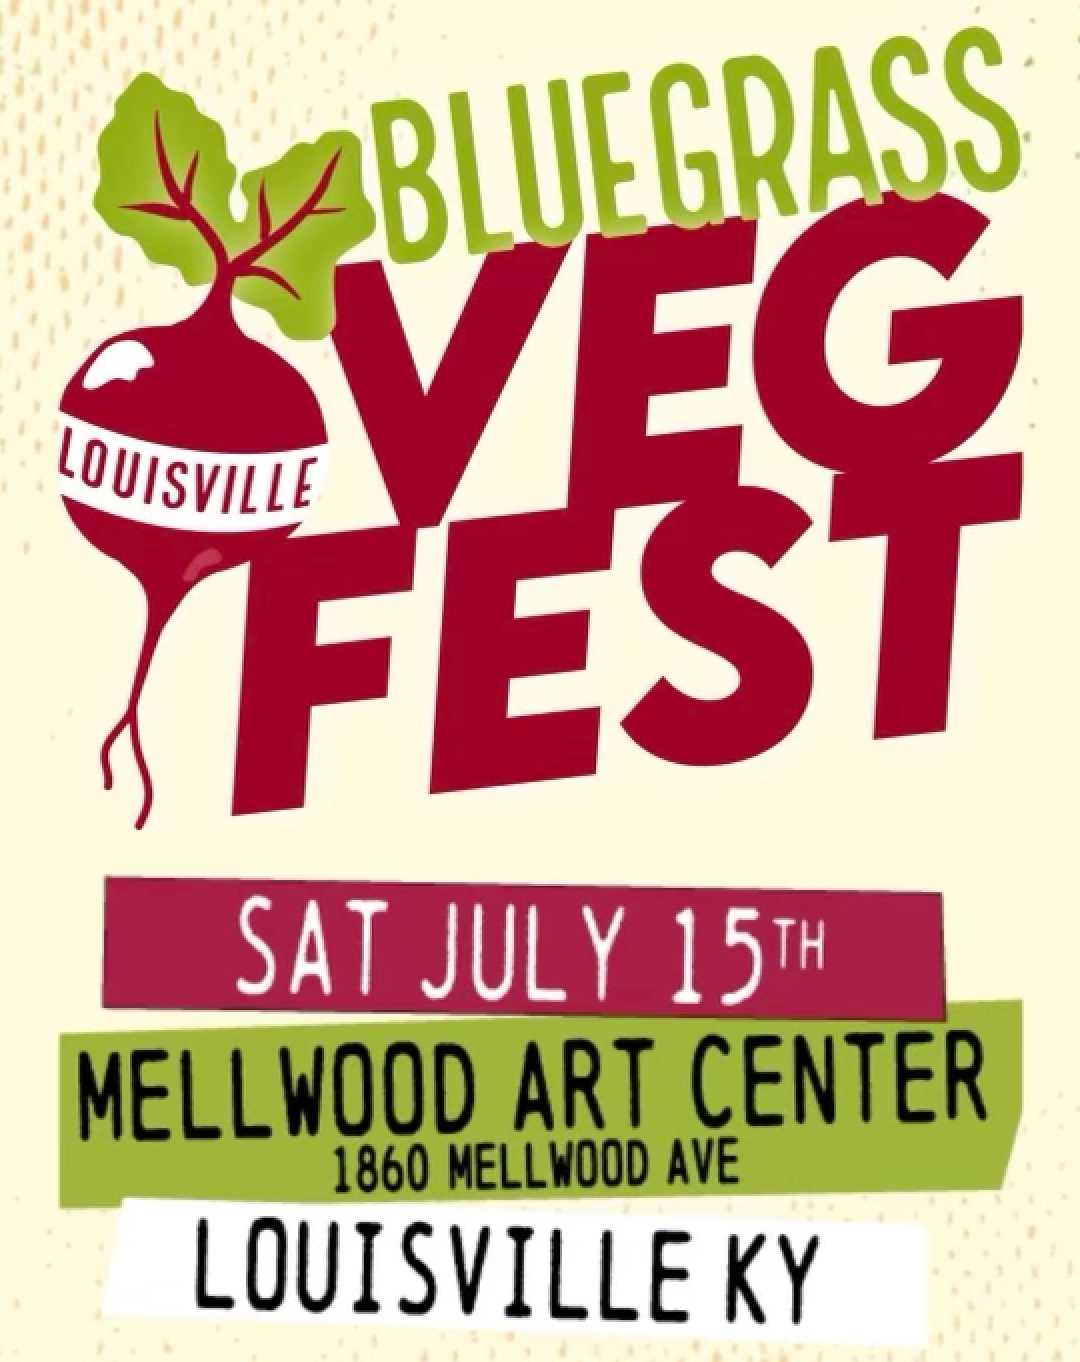 Patrick's Vegan Journey and Giving Back to Bluegrass VegFest